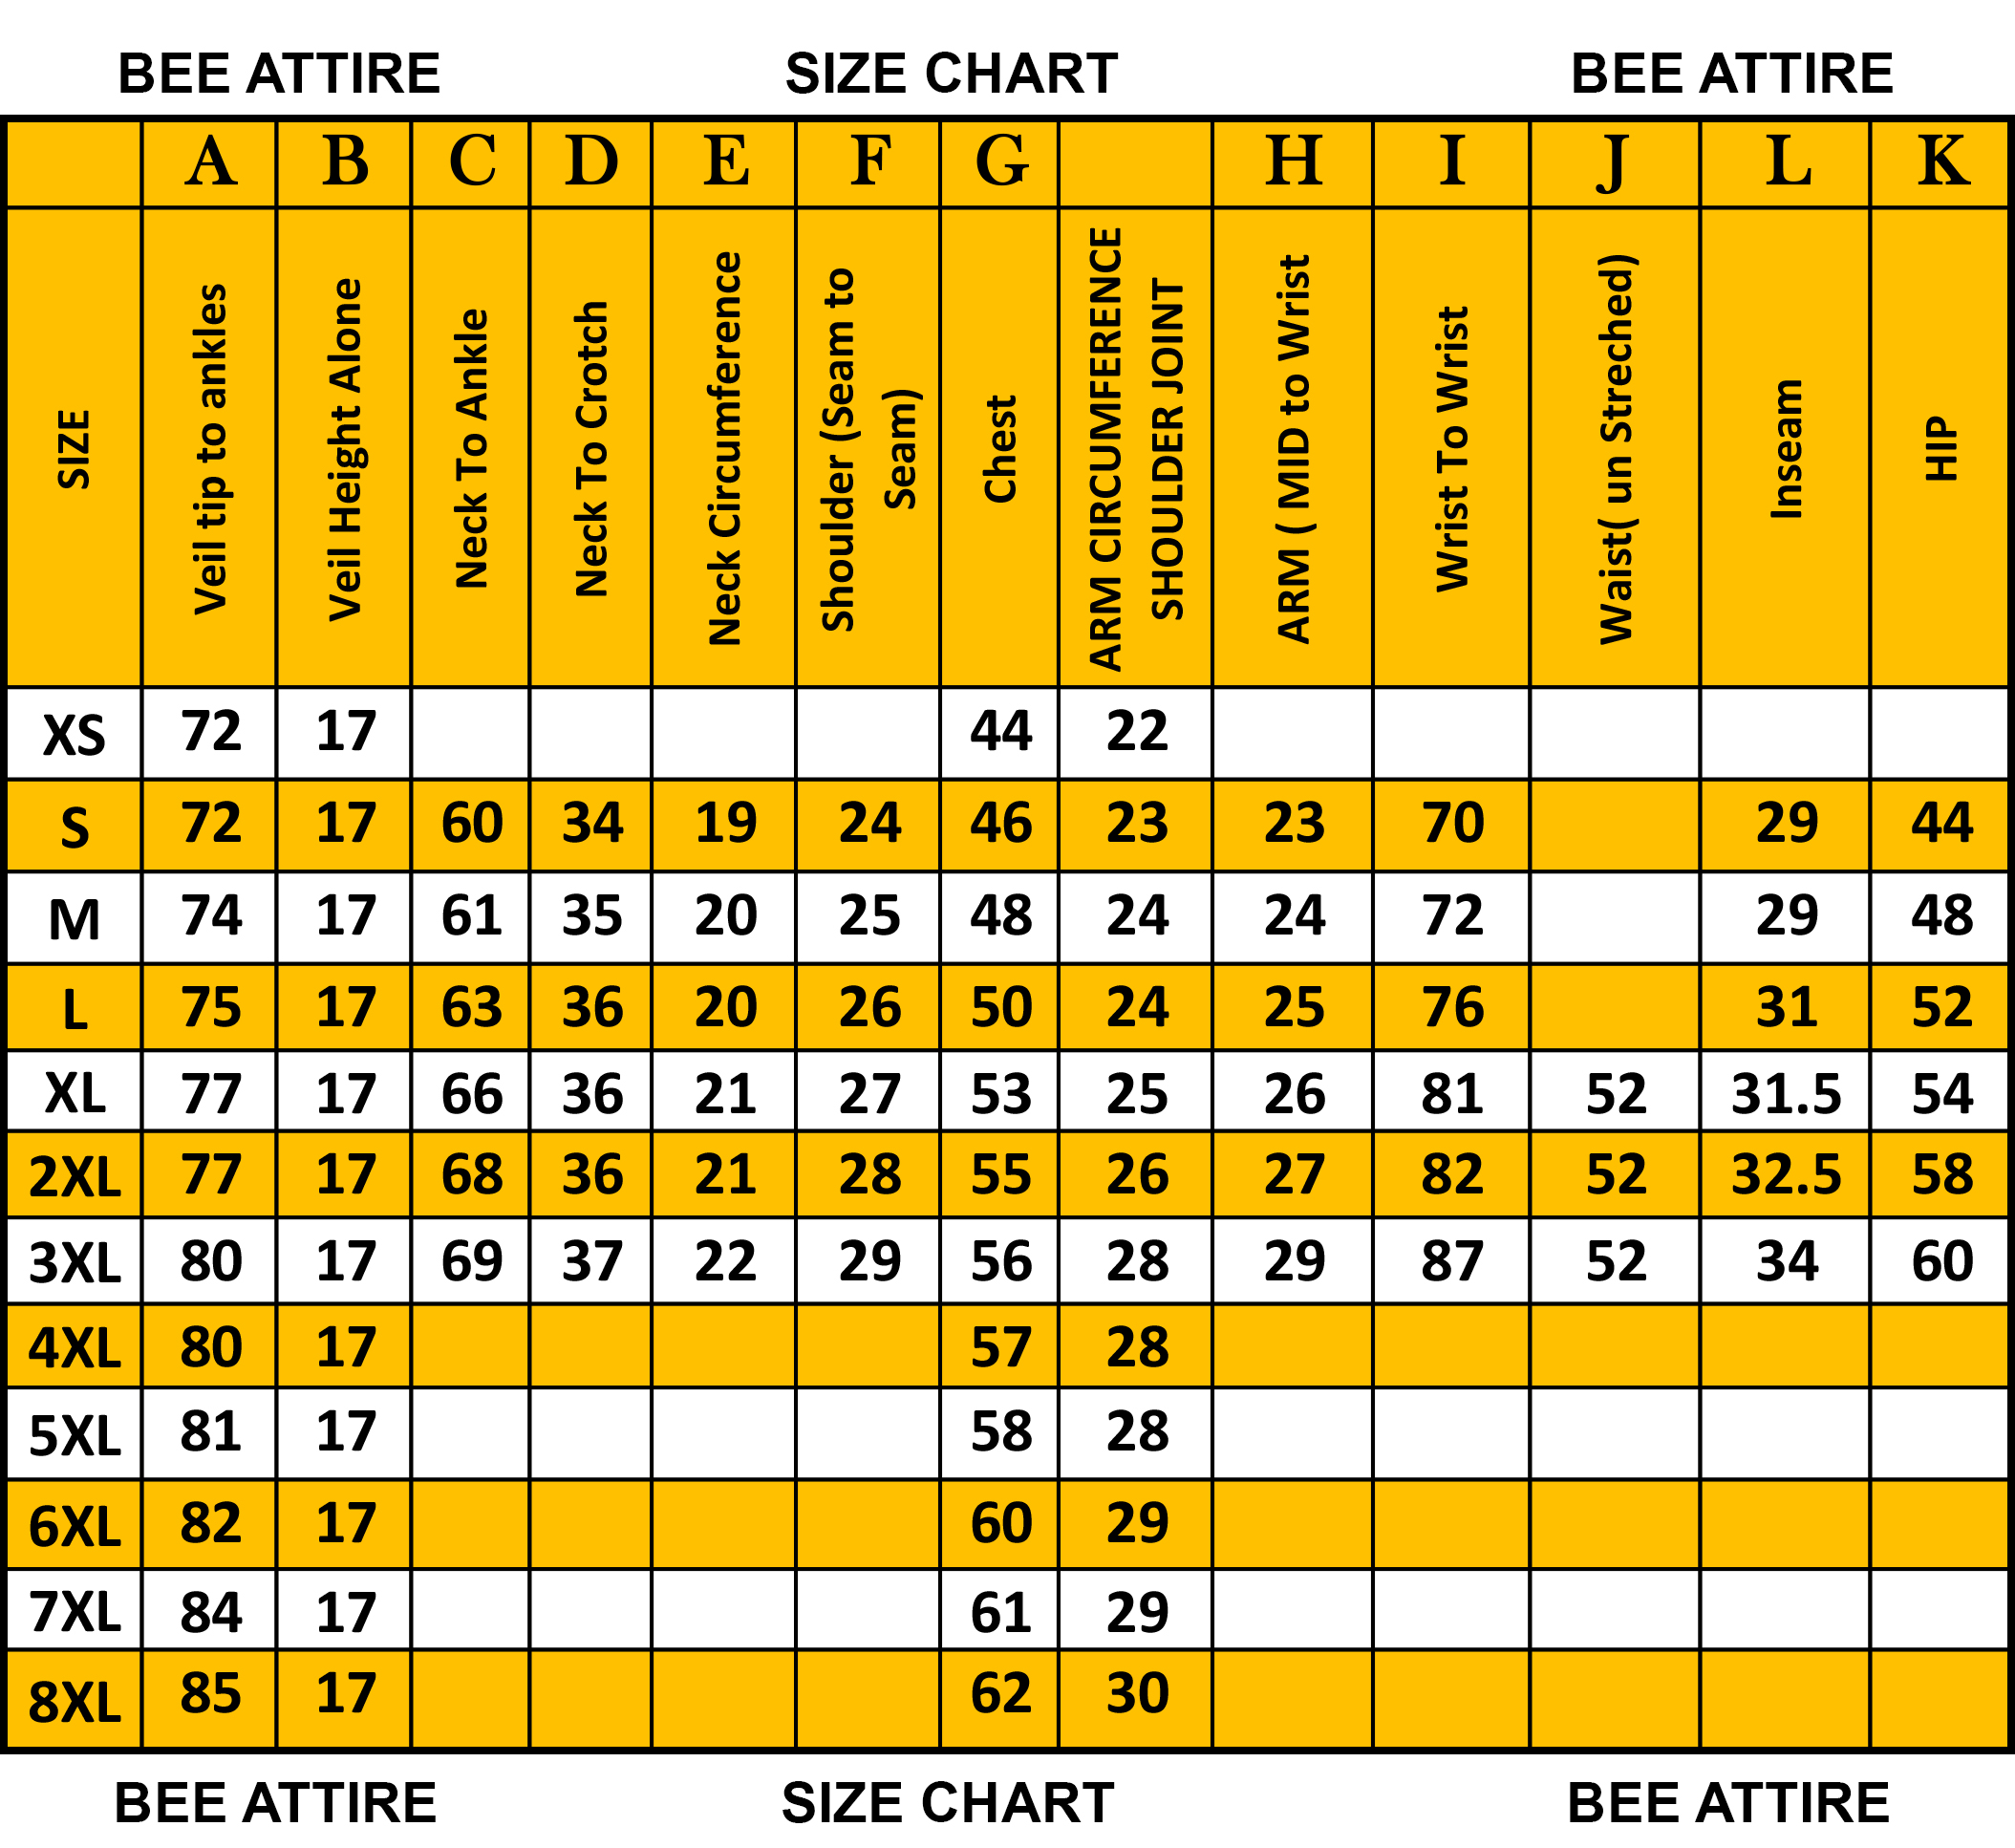 BEEATTIRE SIZE CHART for bee suit